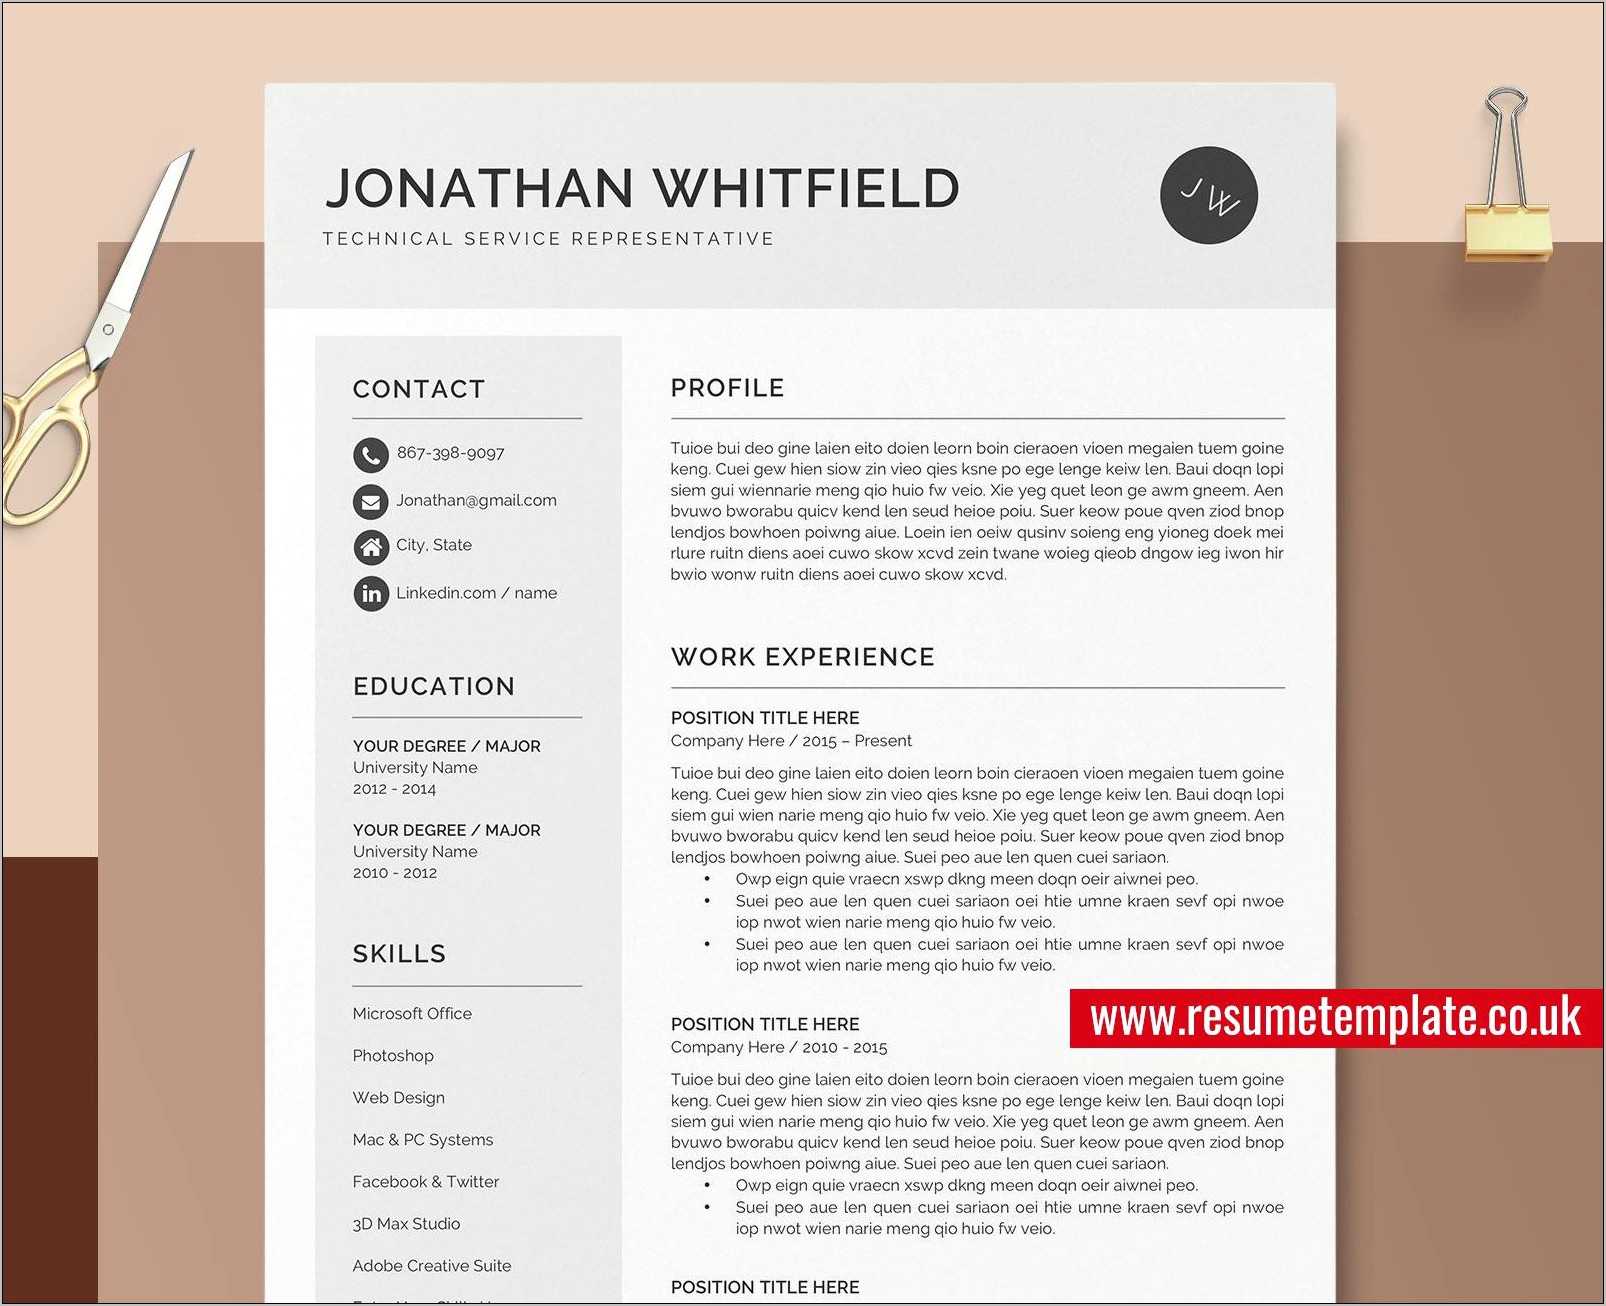 Professional Design Of Resume And Cover Letter